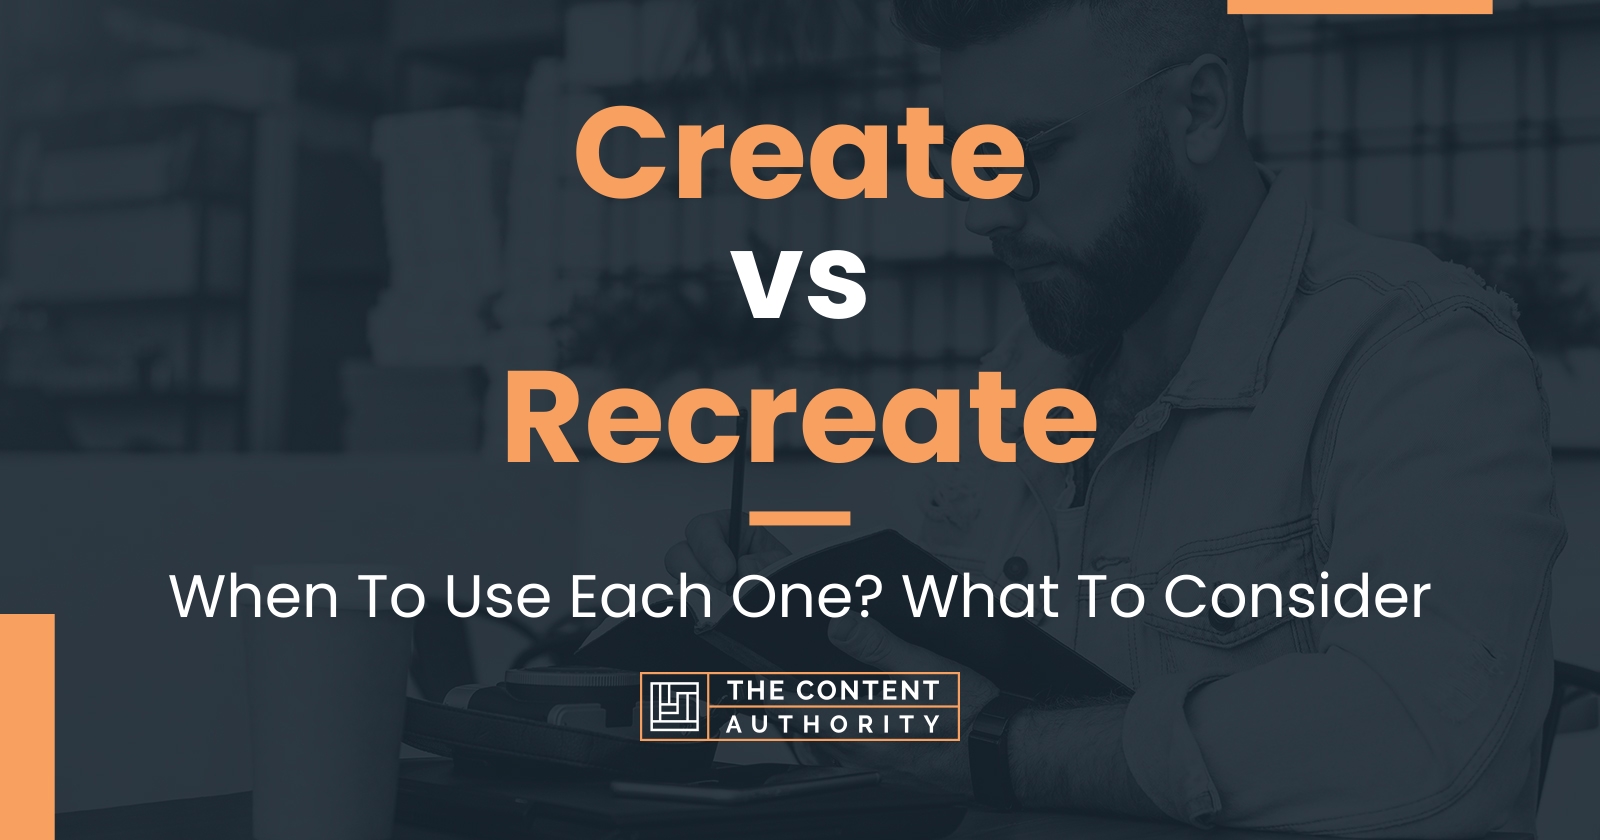 Create vs Recreate: When To Use Each One? What To Consider